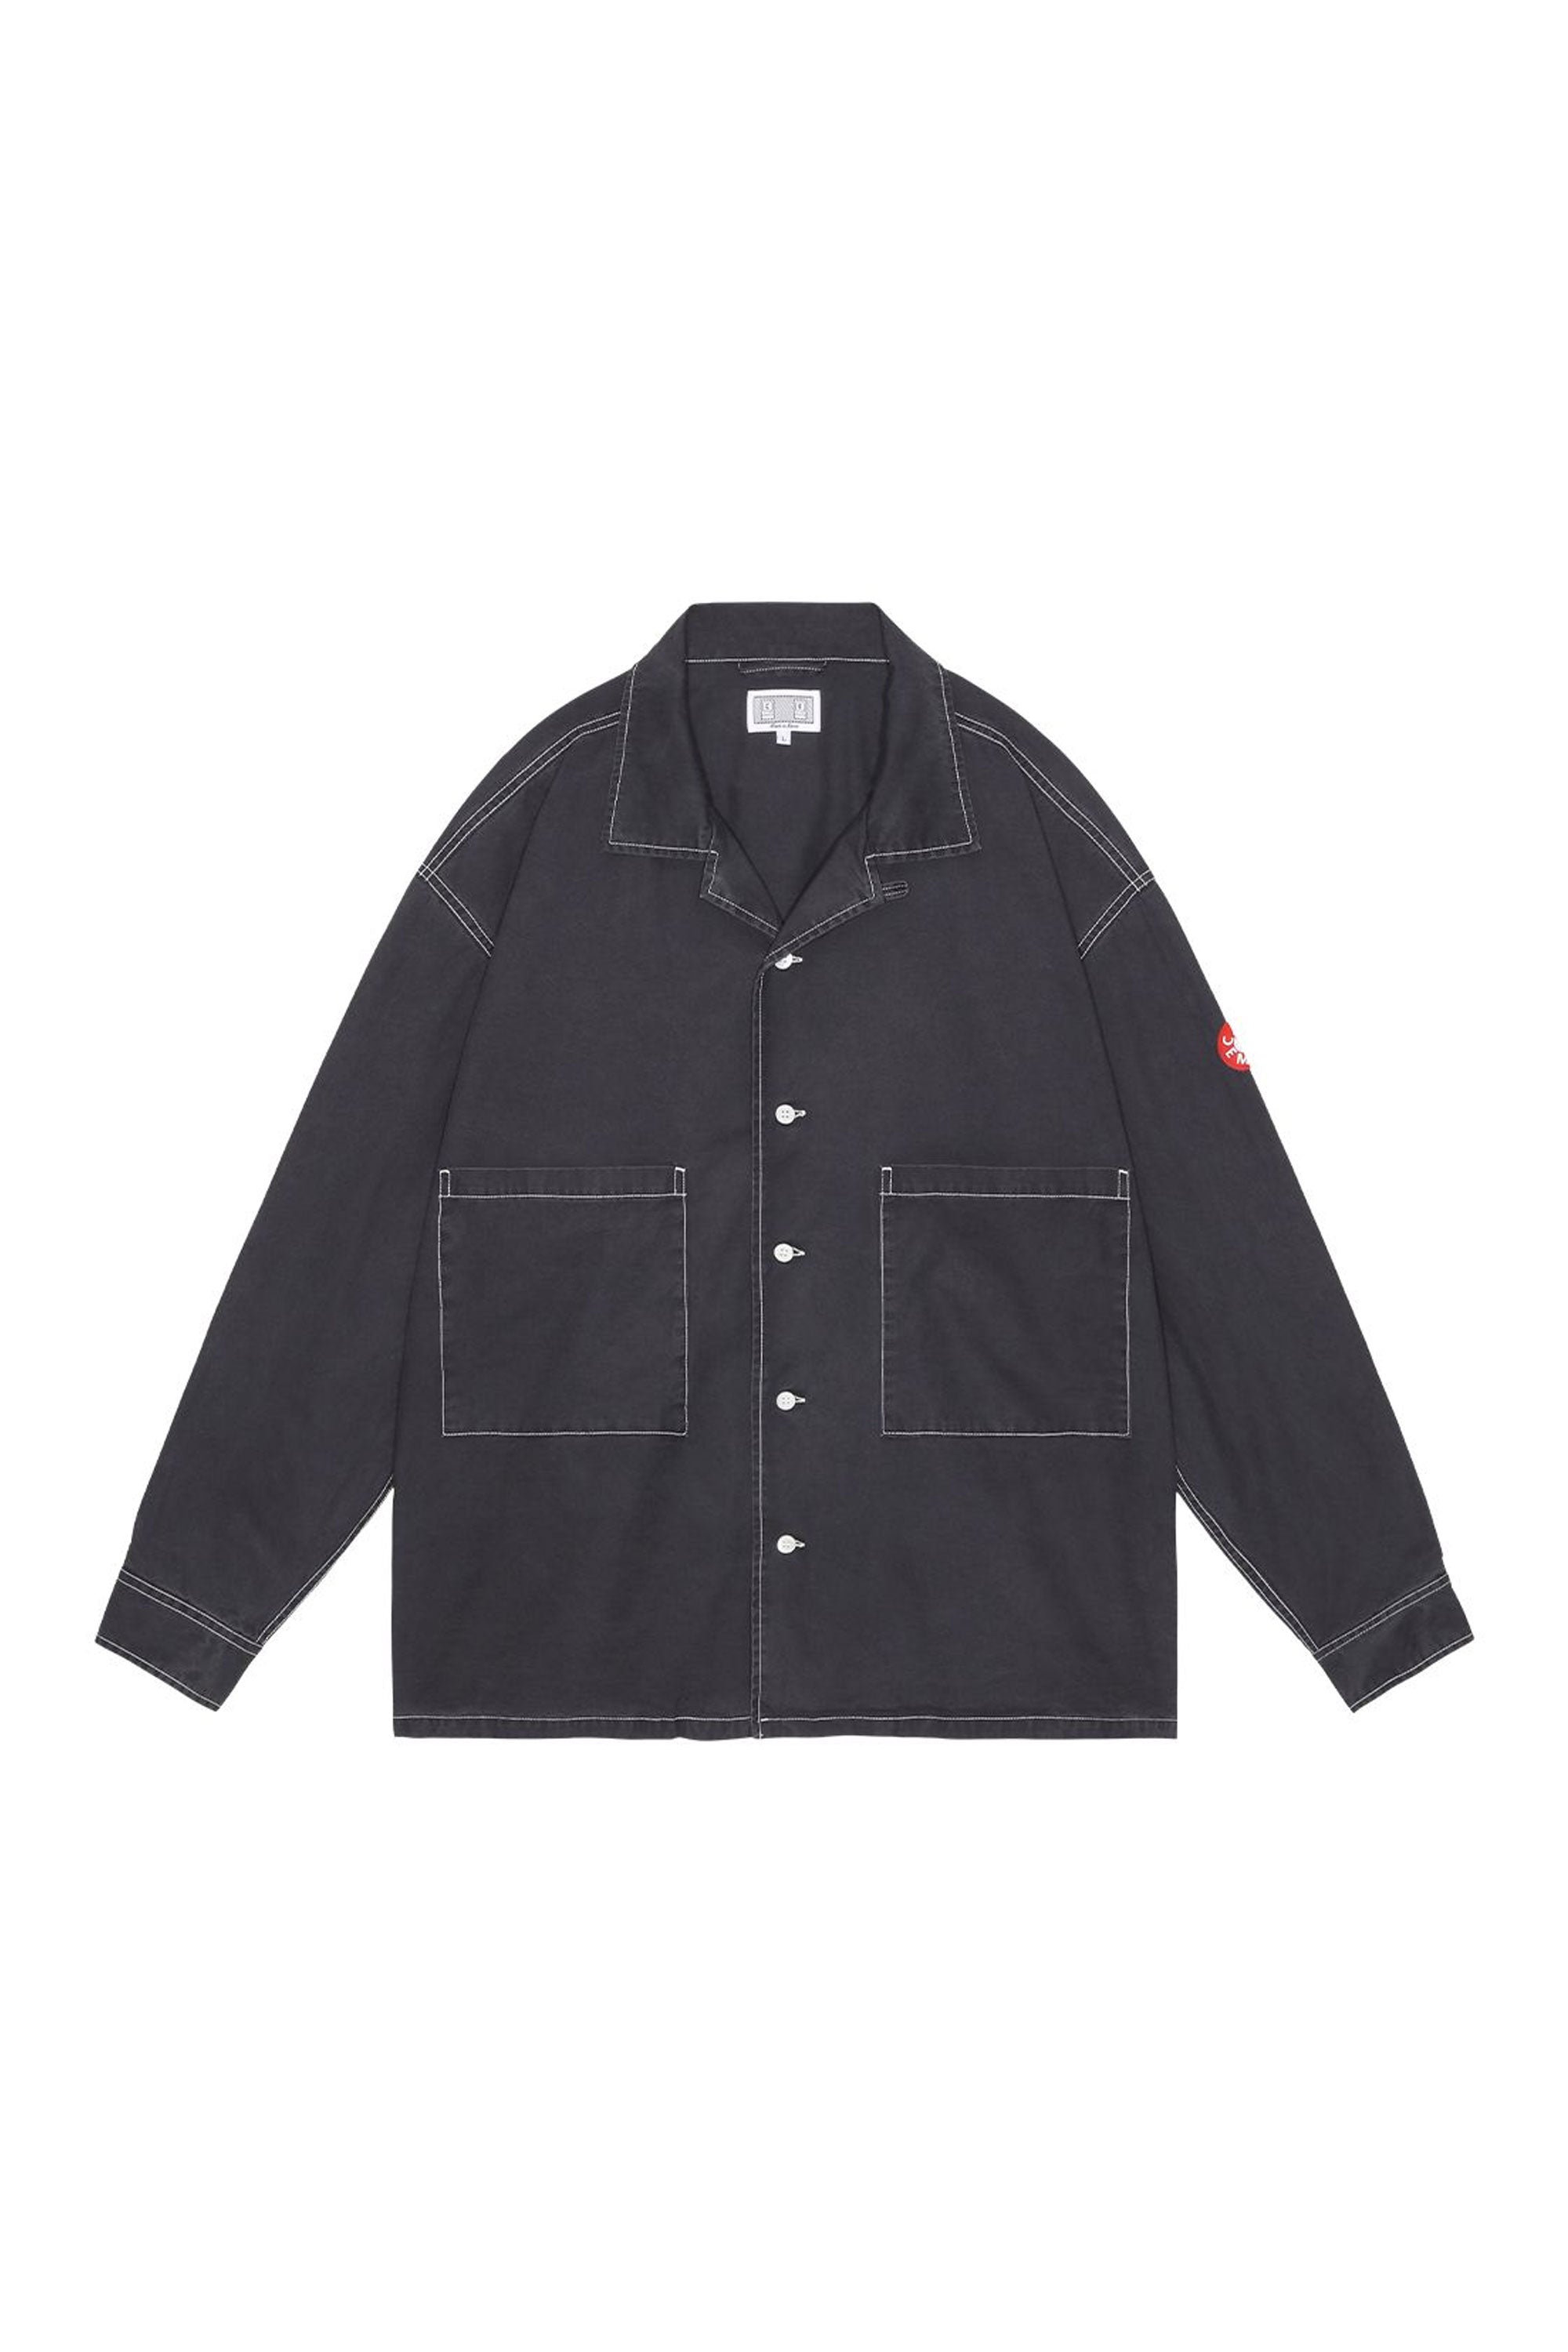 The CAV EMPT - WASHED OPEN SHIRT  available online with global shipping, and in PAM Stores Melbourne and Sydney.